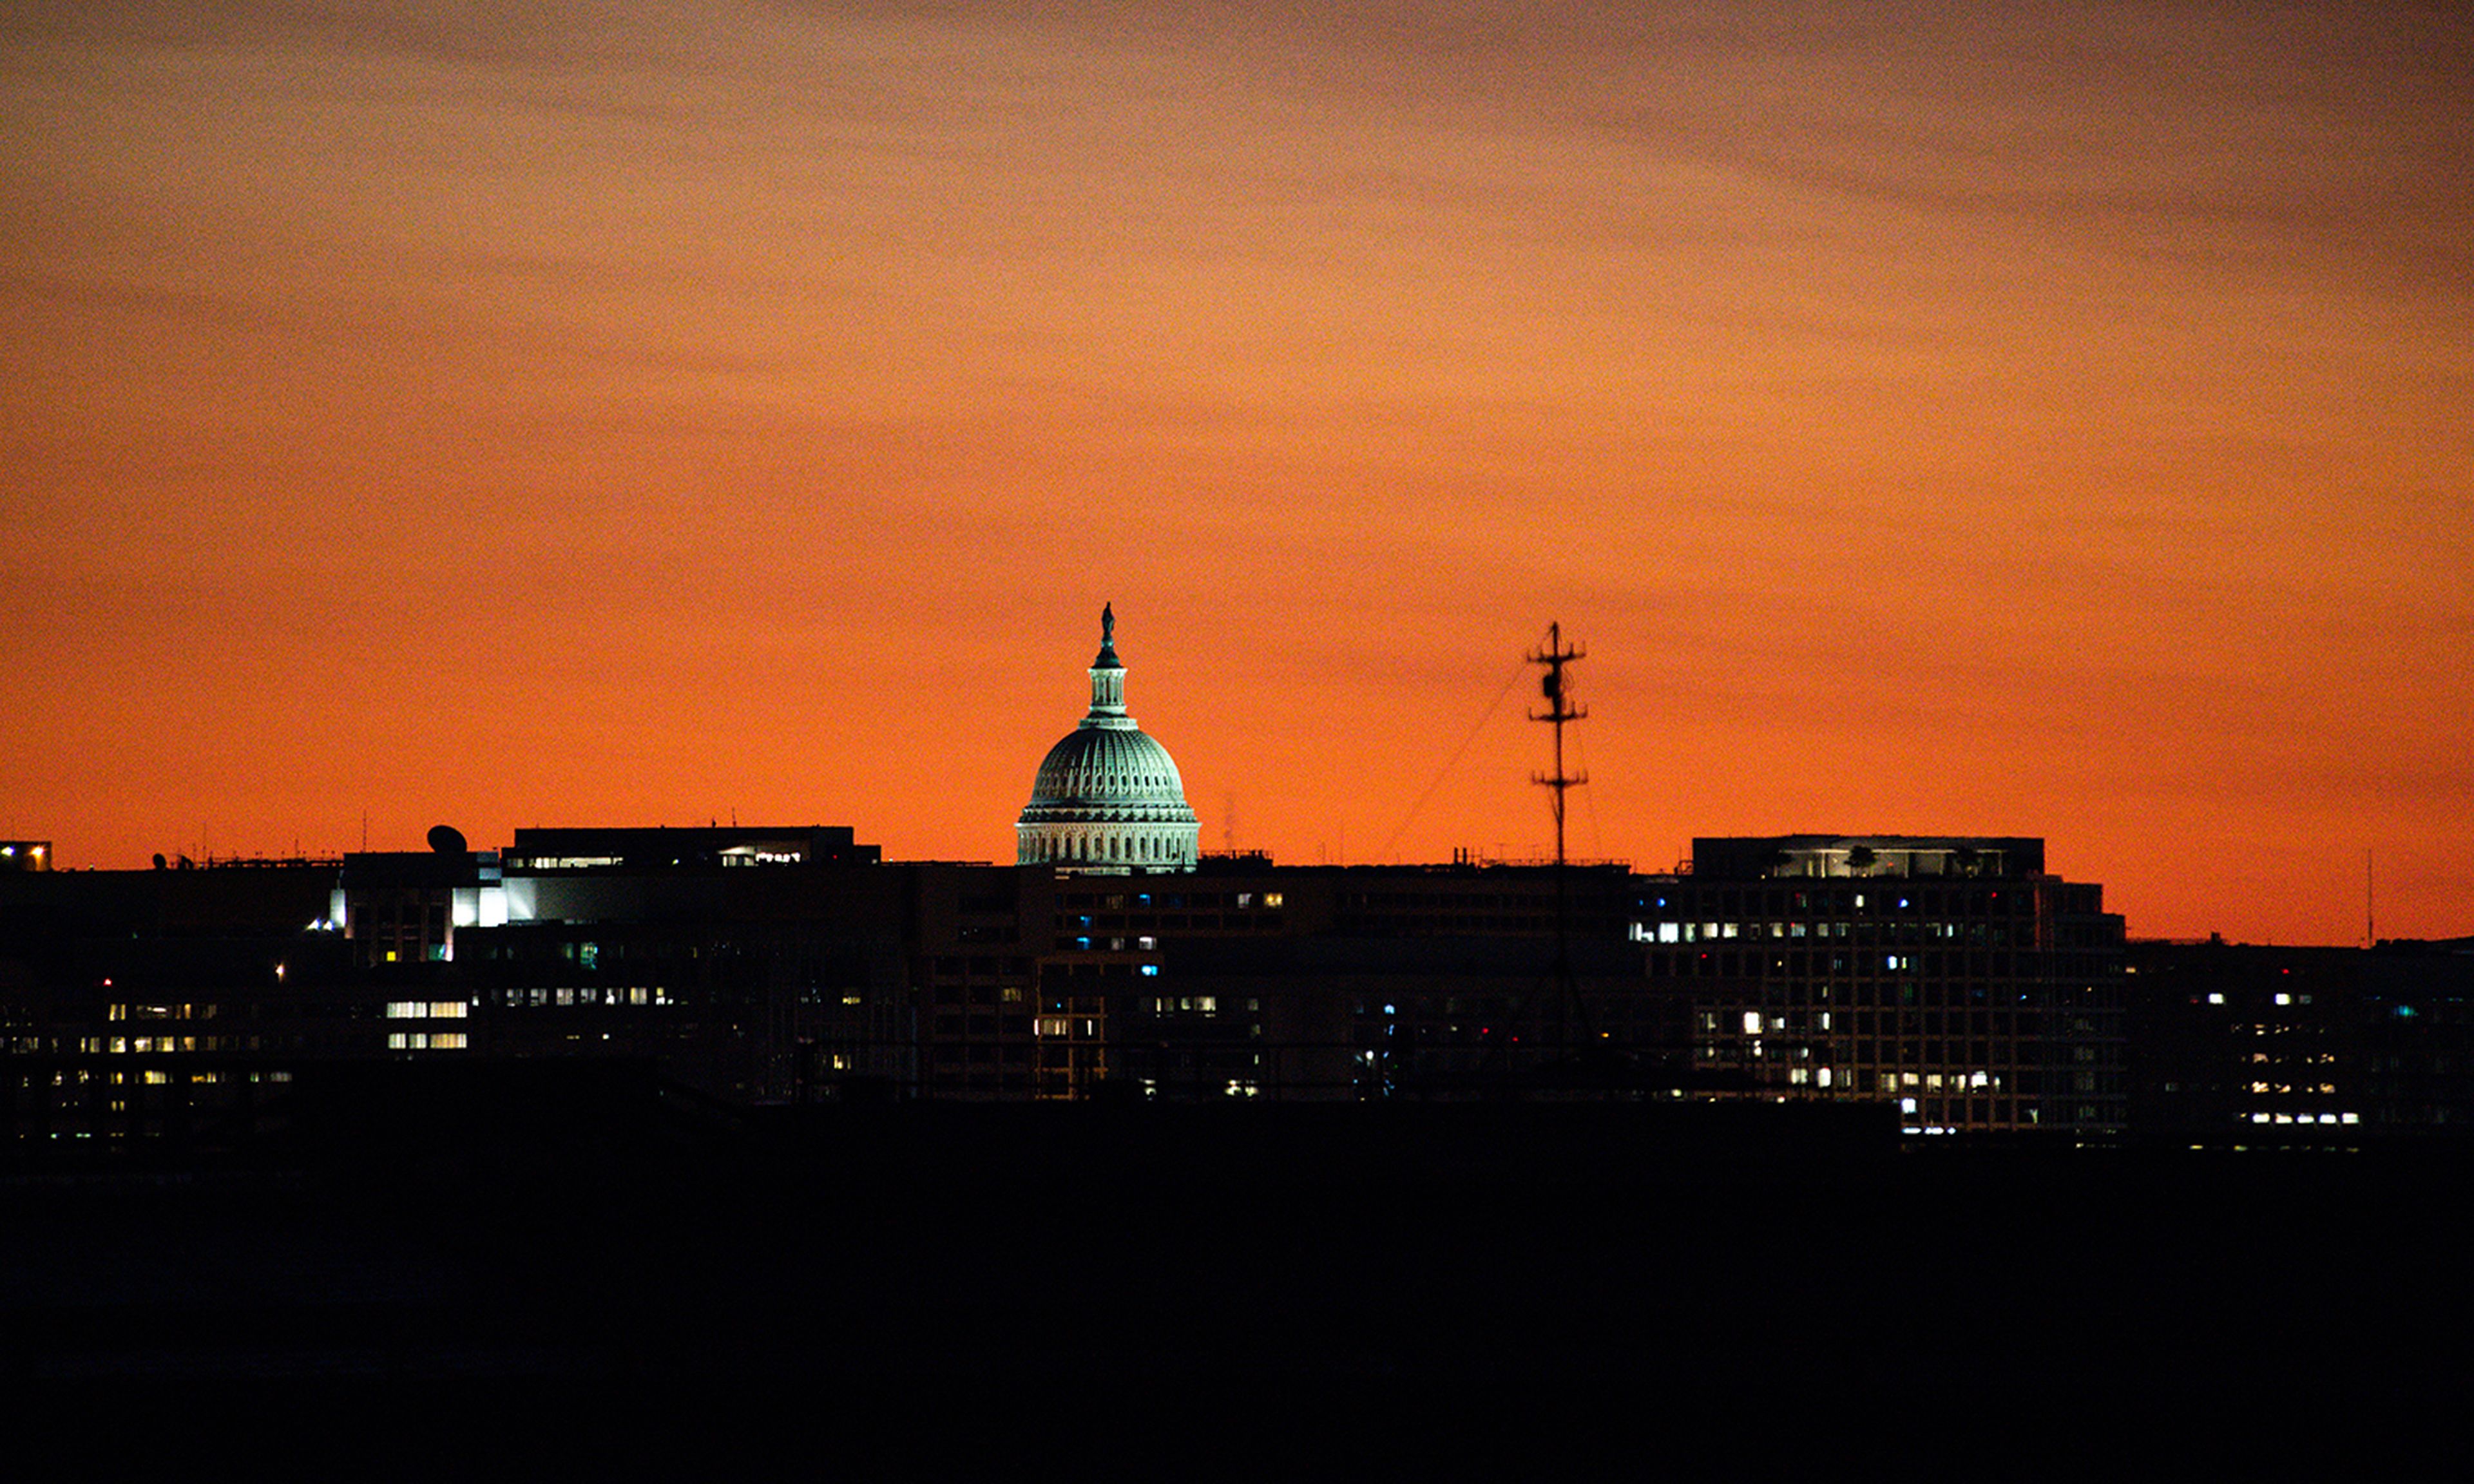 The U.S. Capitol dome is seen from the Pentagon in Arlington, Va., on Sept. 11, 2021. (Cpl. Zachery Perkins/Army)